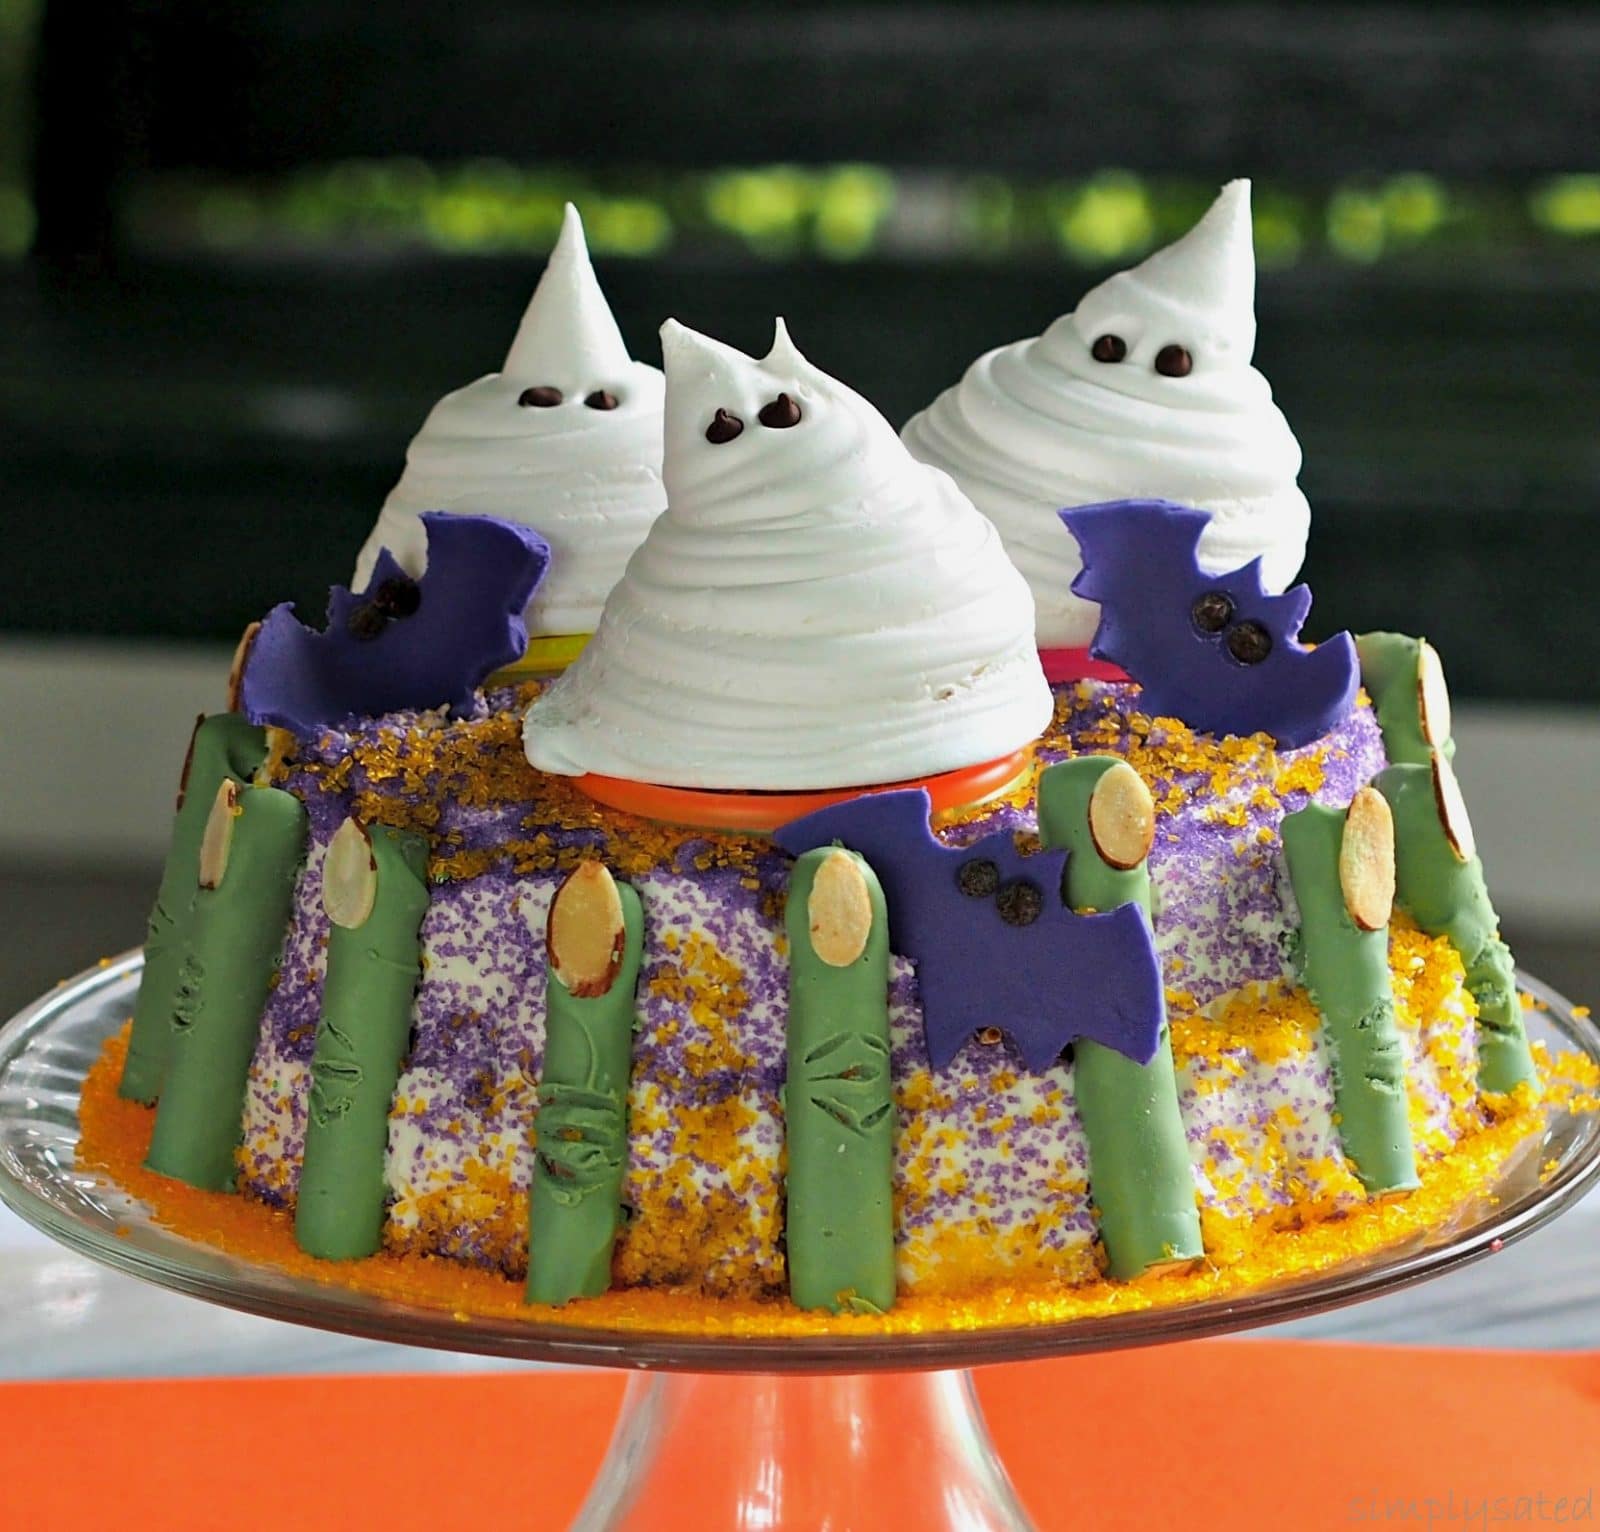 Halloween Glow Cake-lots of fun treats come together to create a dessert all guests will love. simplysated